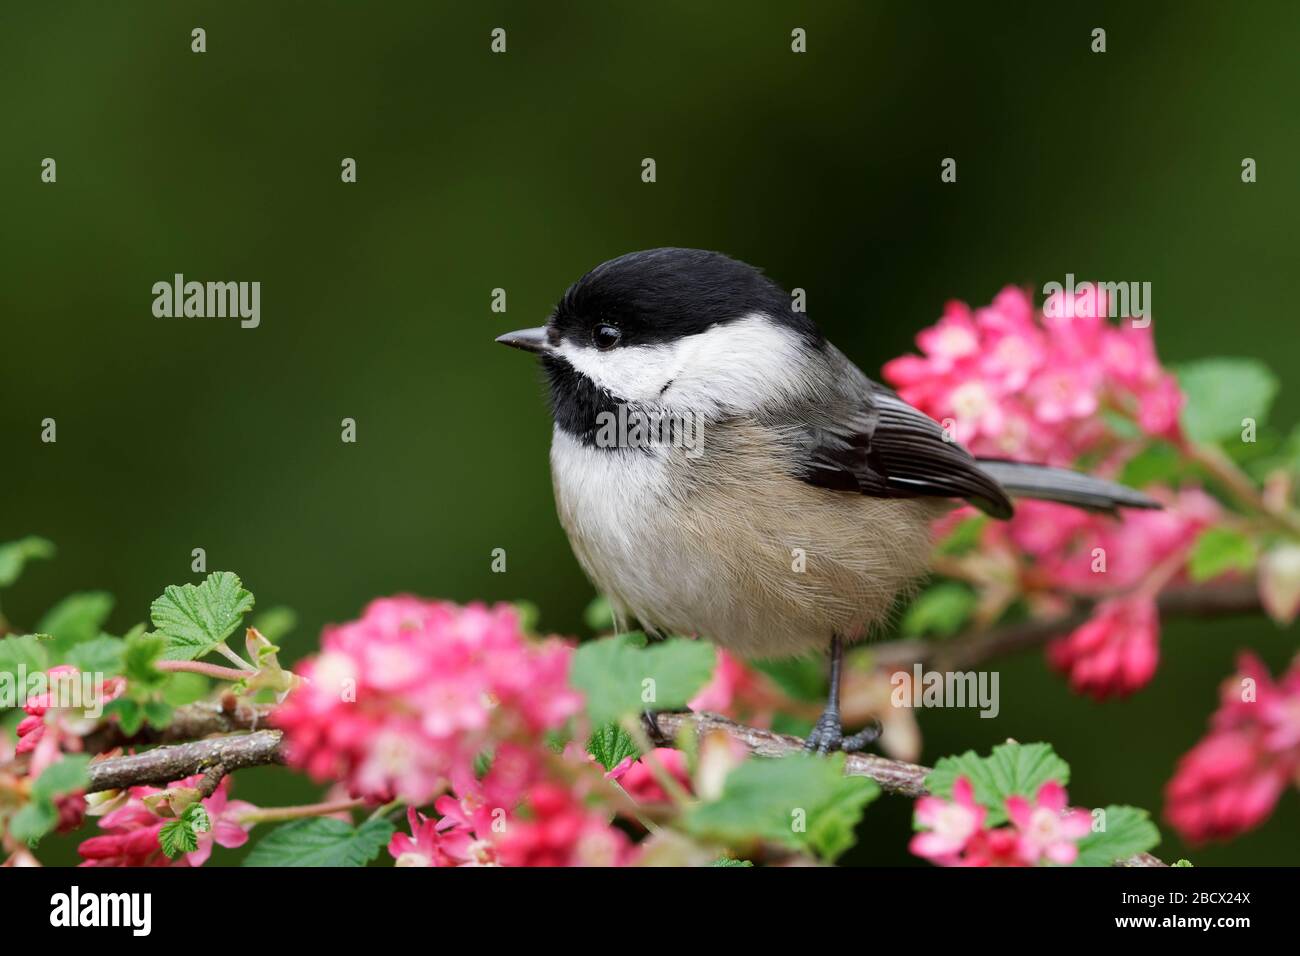 Black-capped chickadee perched on red flowering currant branch, Snohomish, Washington, USA Stock Photo